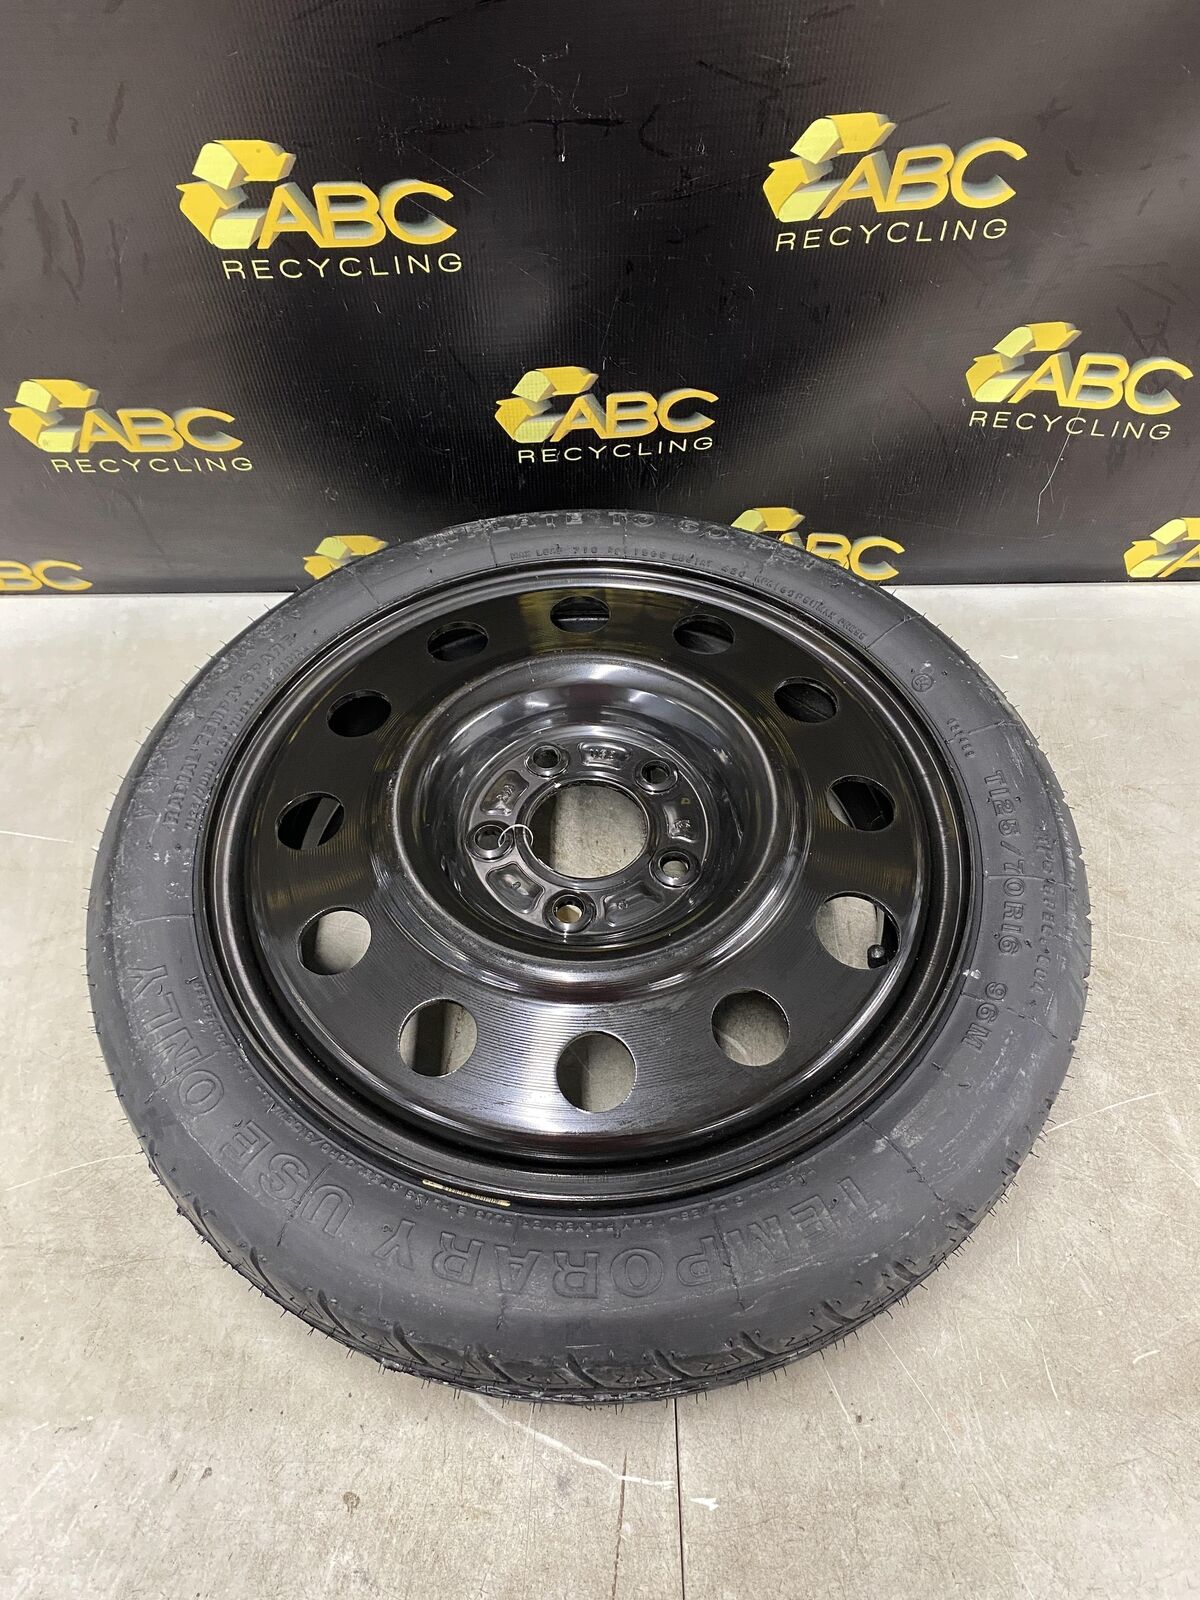 2000-2005 Cadillac Deville DHS Compact Spare Wheel Tire 16x4 OEM CADILLAC